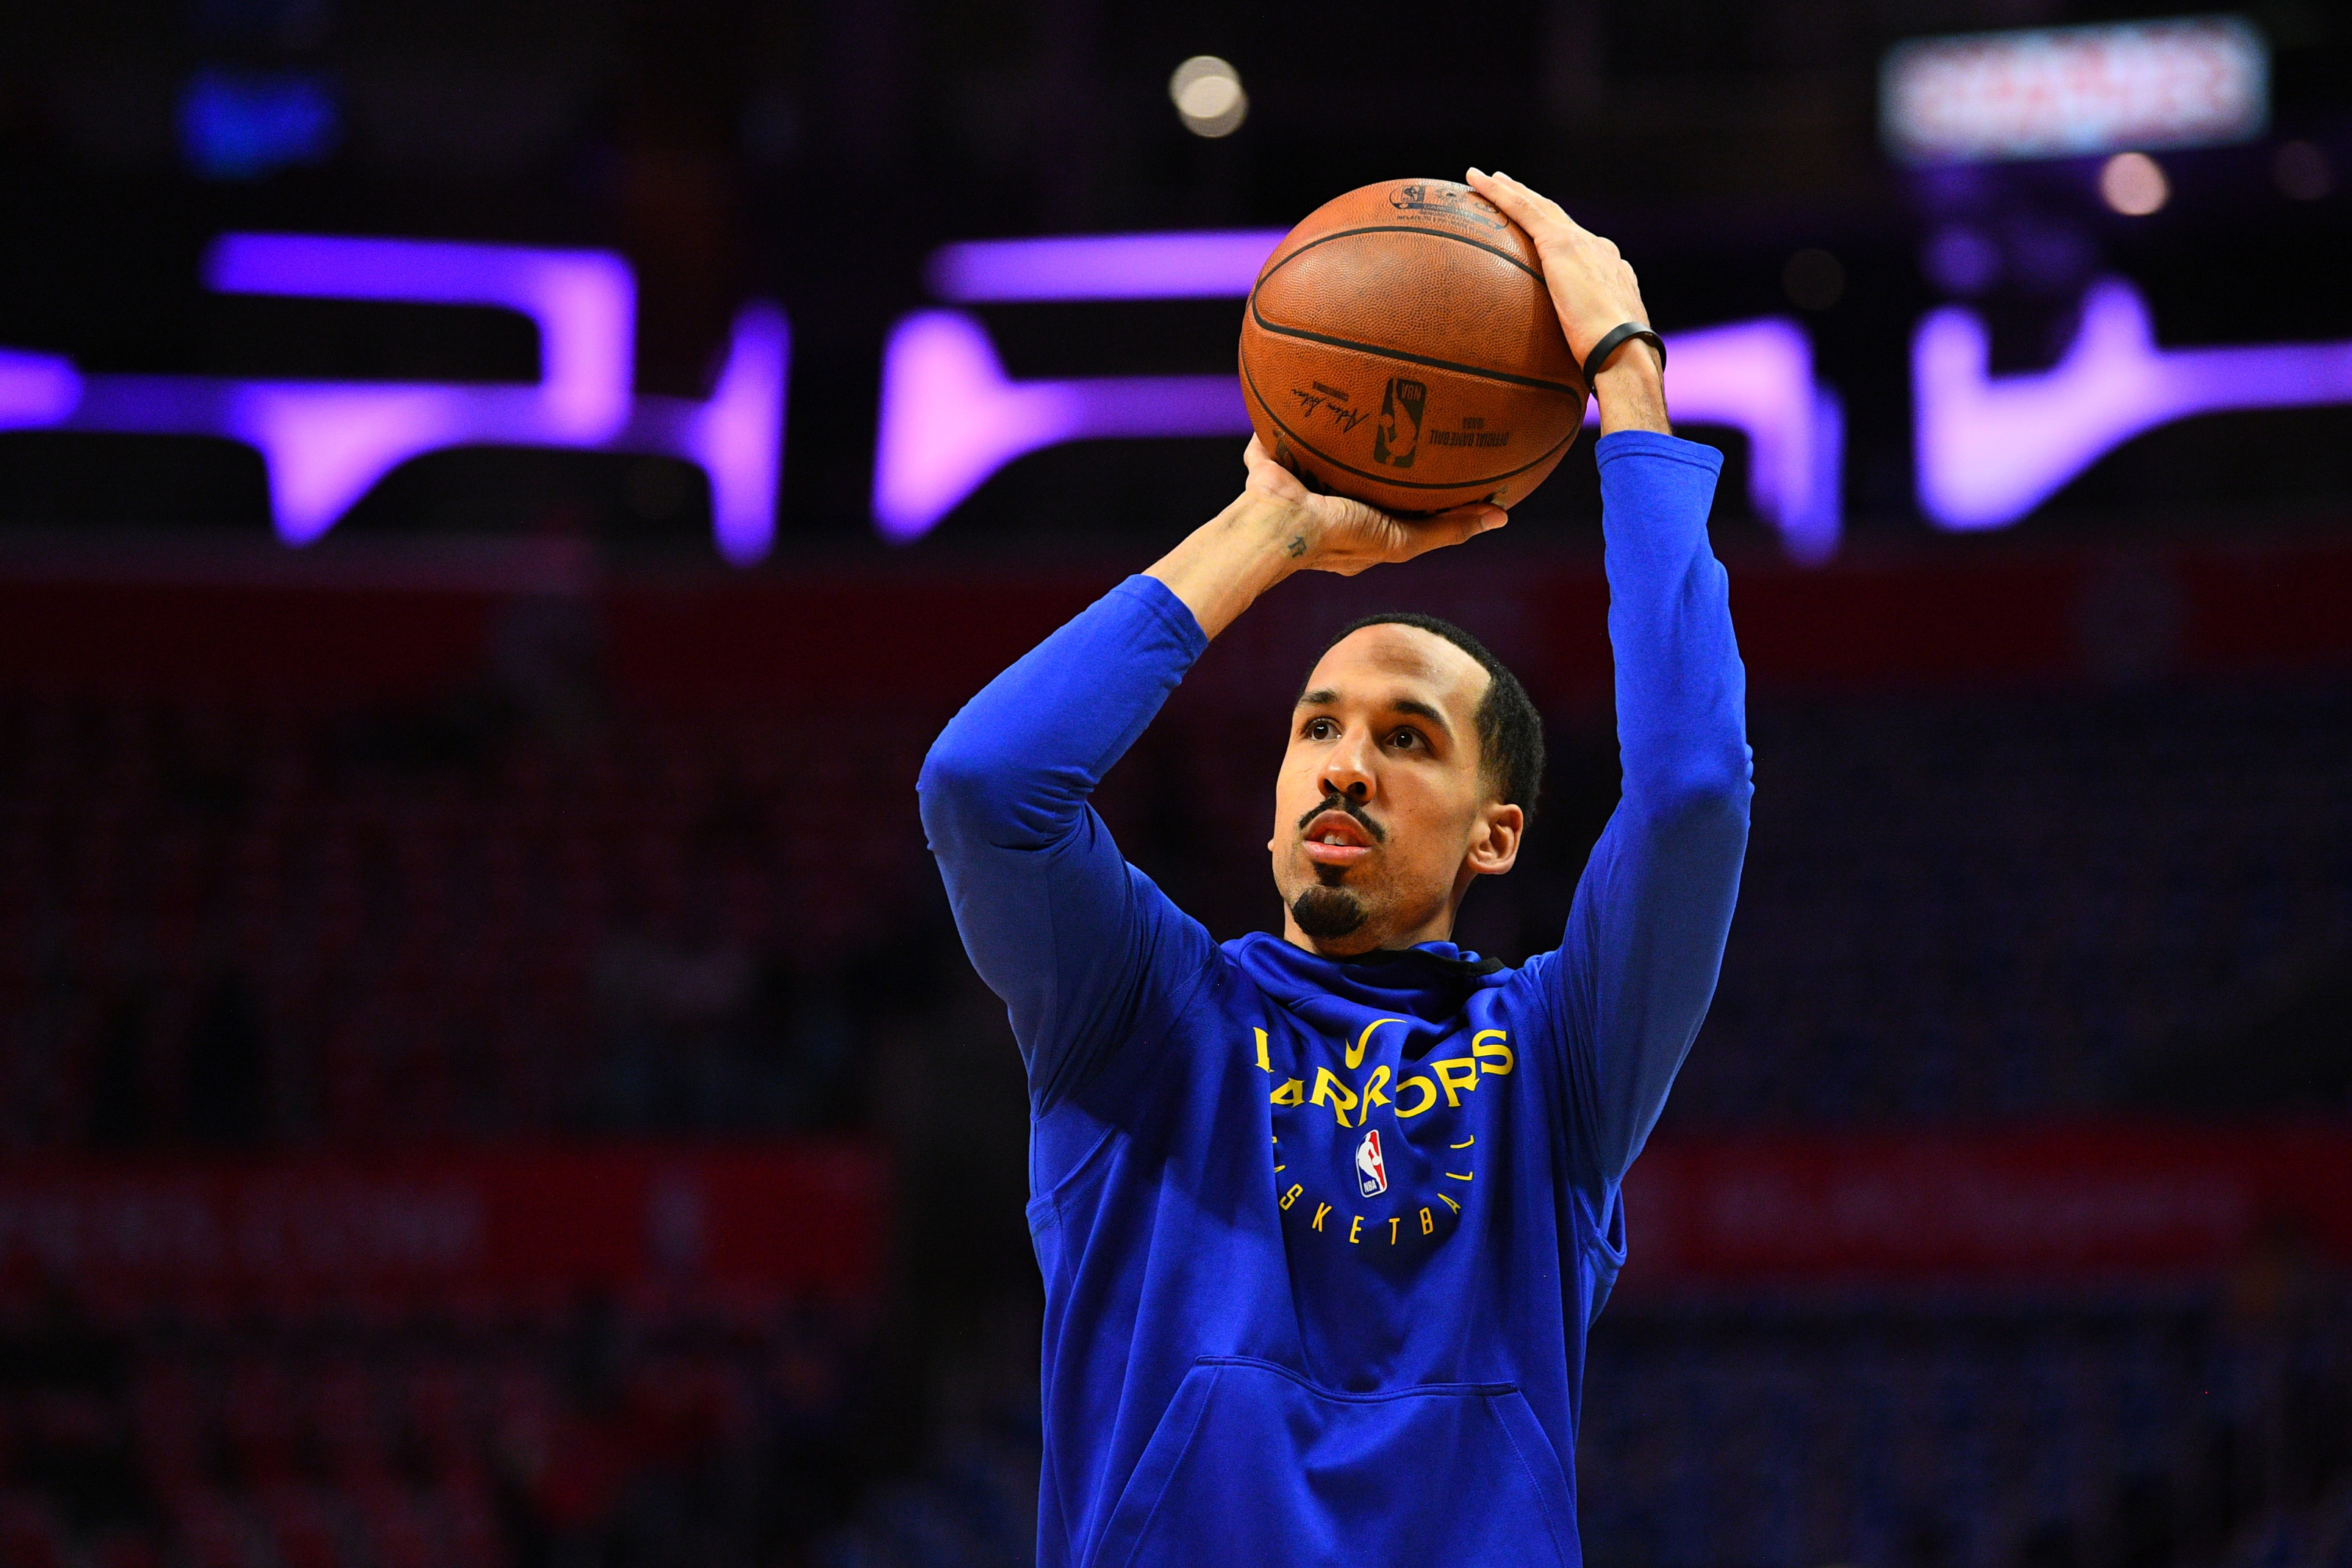 Rumor: Shaun Livingston has interest in returning to the LA Clippers